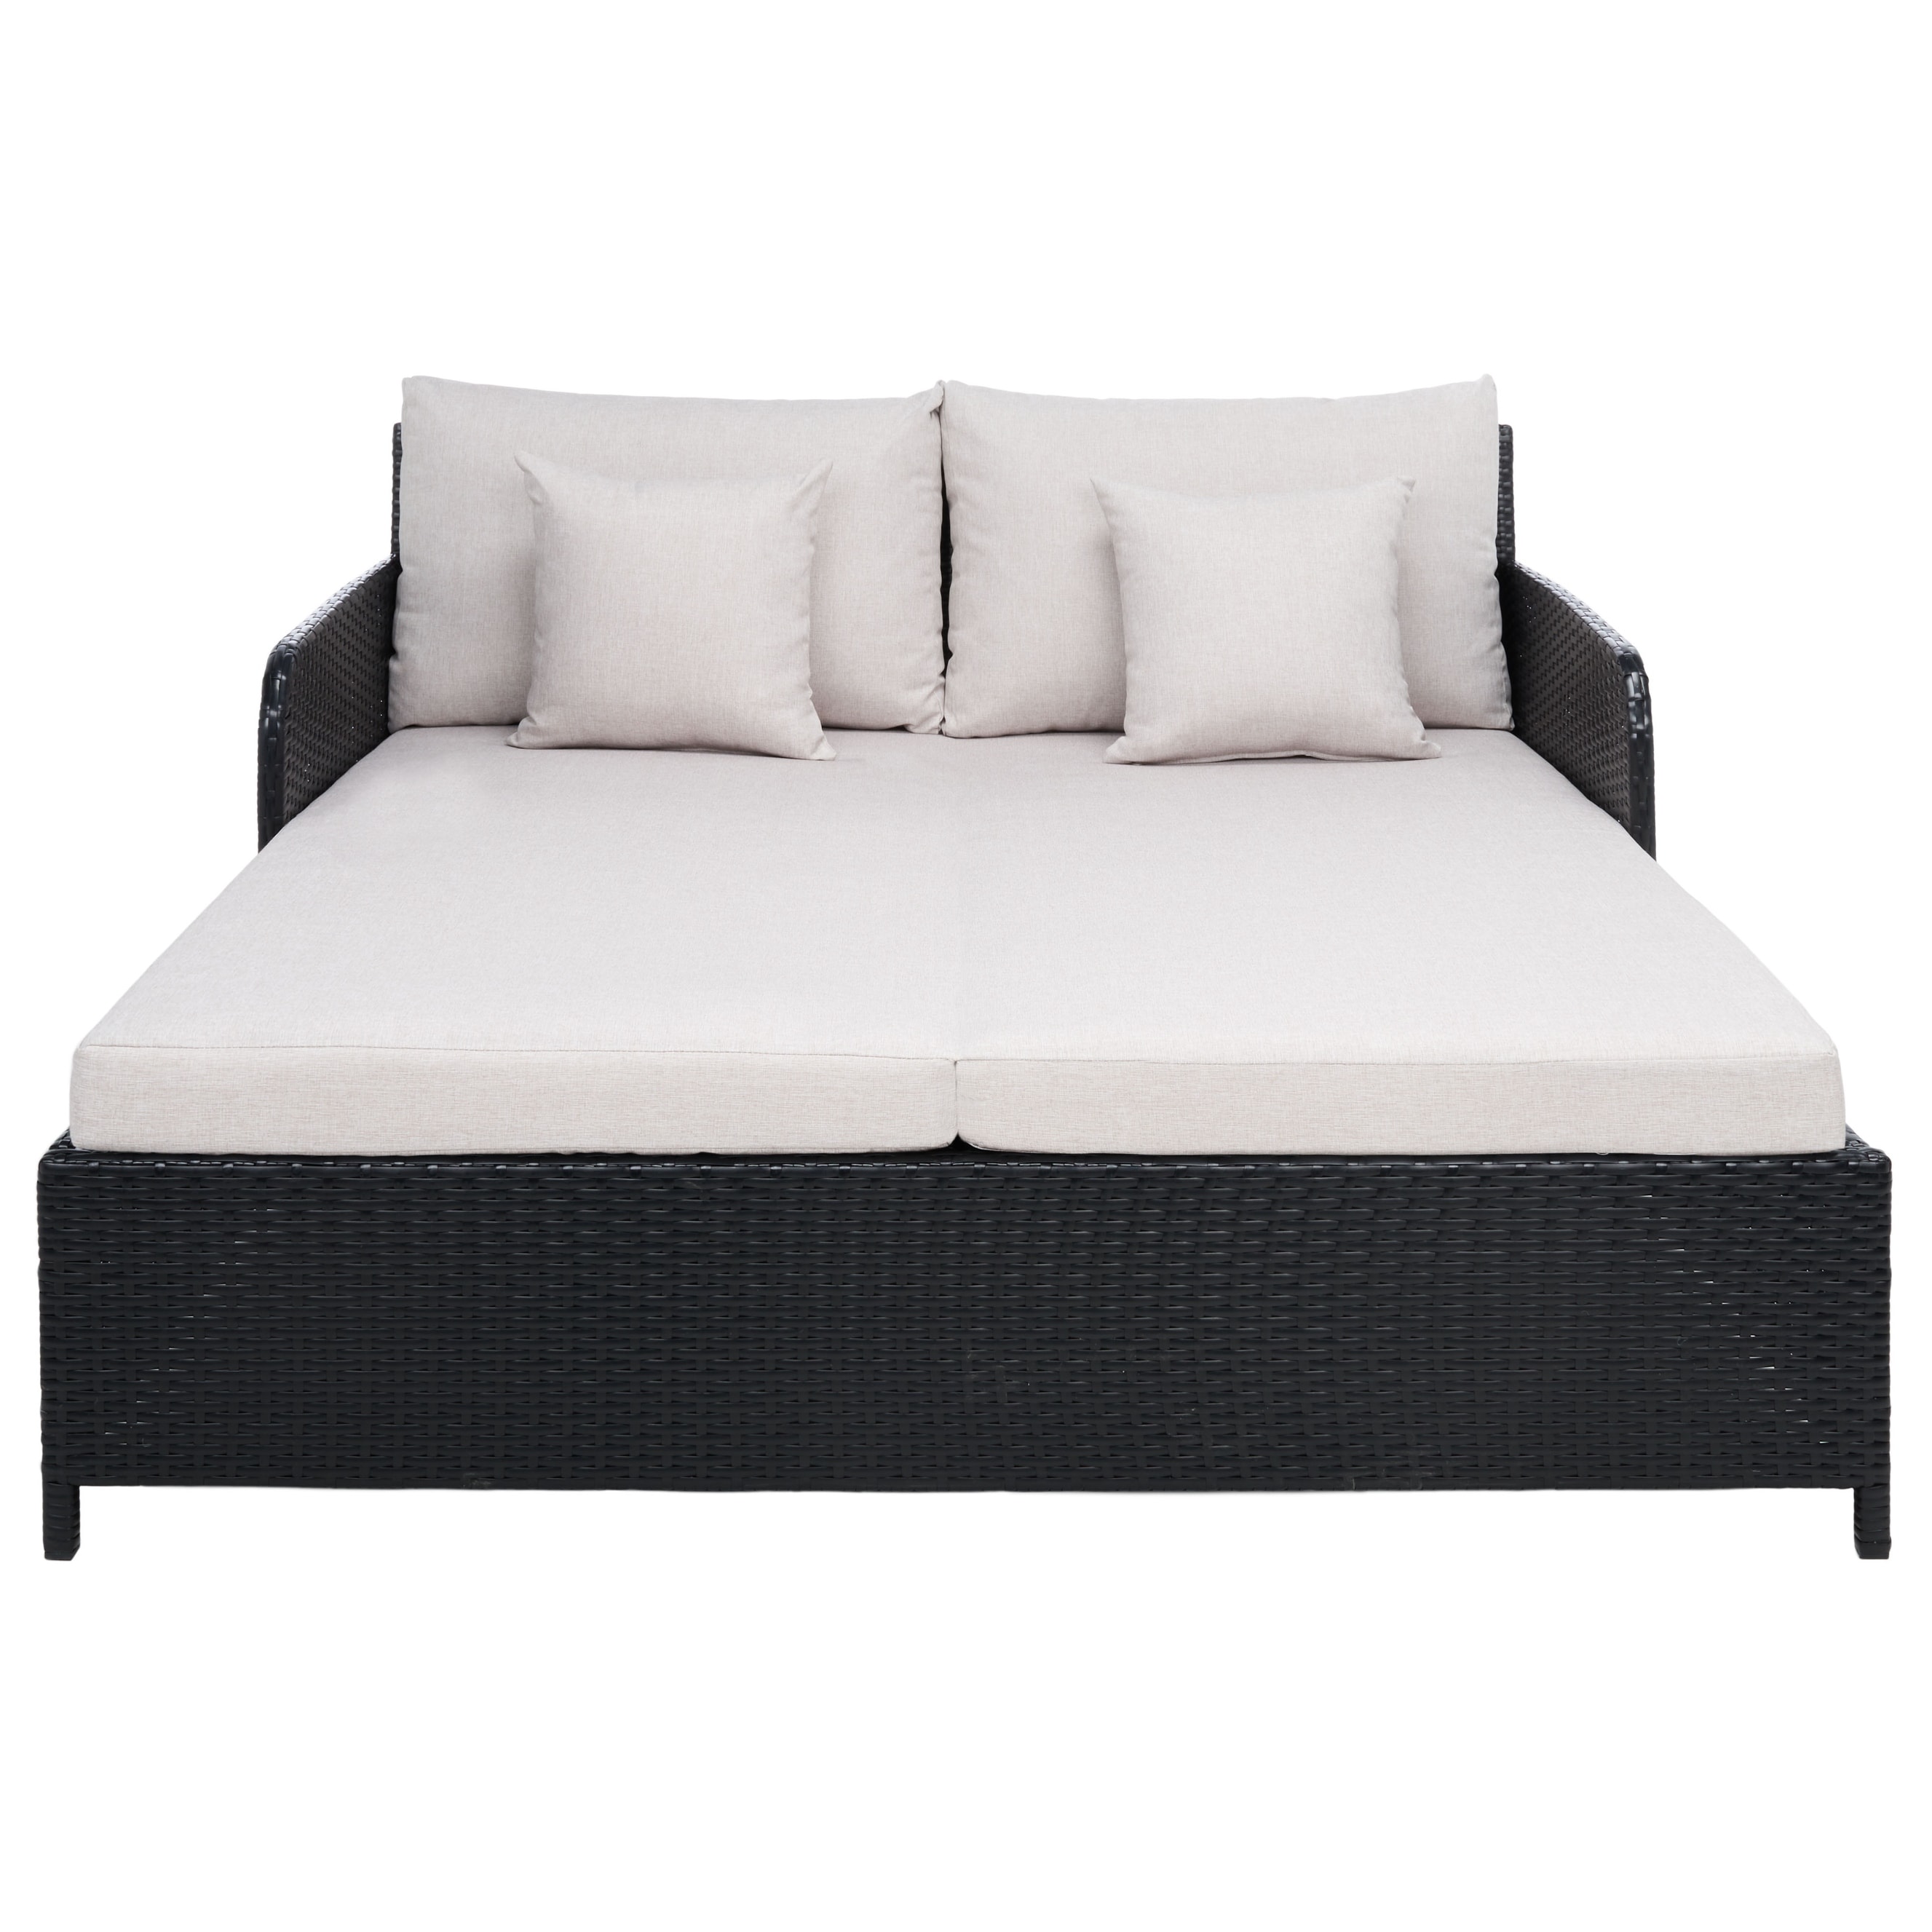 Safavieh Outdoor Cadeo Wicker Daybed With Pillows And Cushions